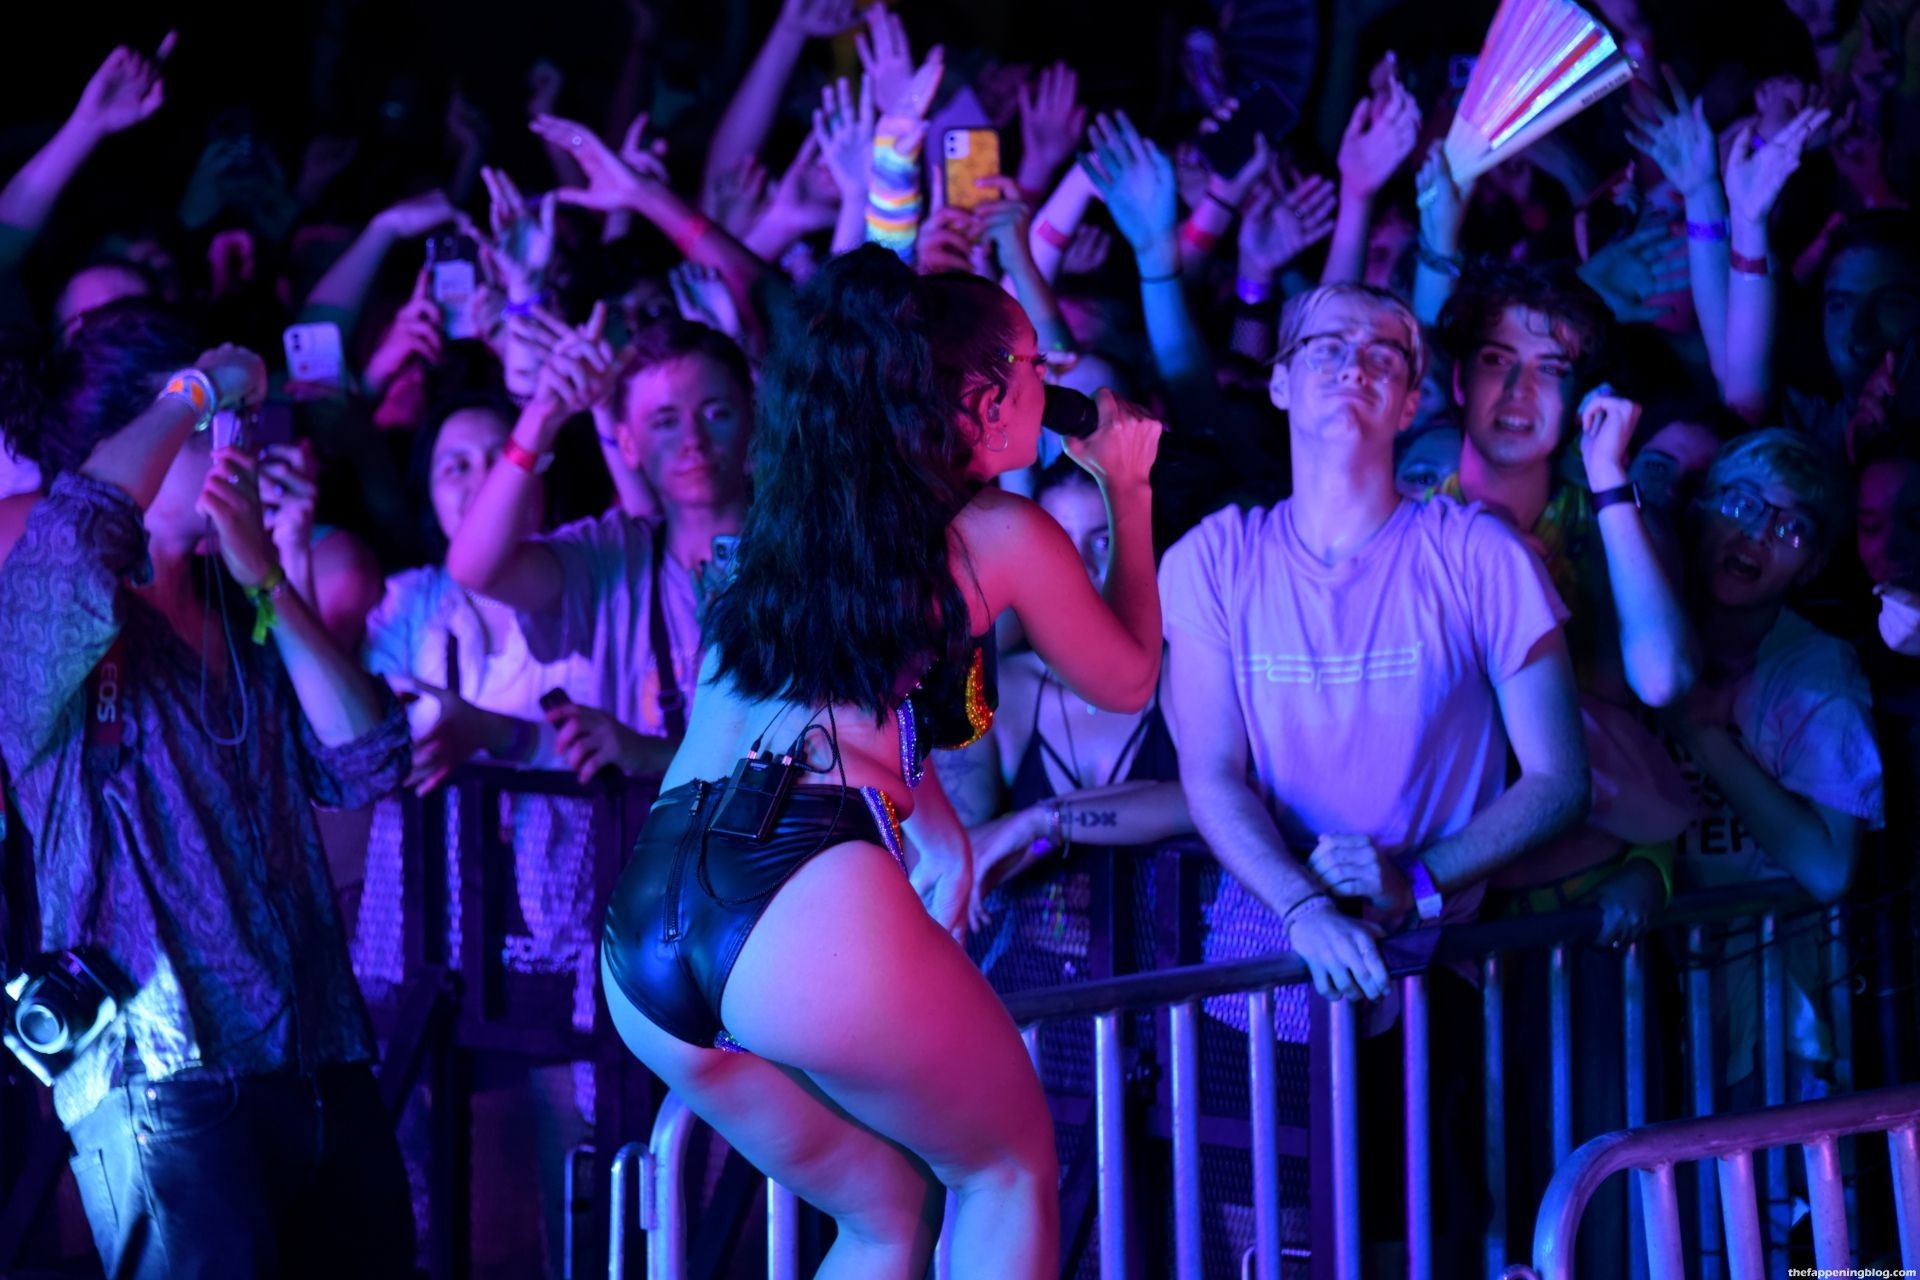 Charli-XCX-Sexy-on-Stage-23-thefappeningblog.com_.jpg